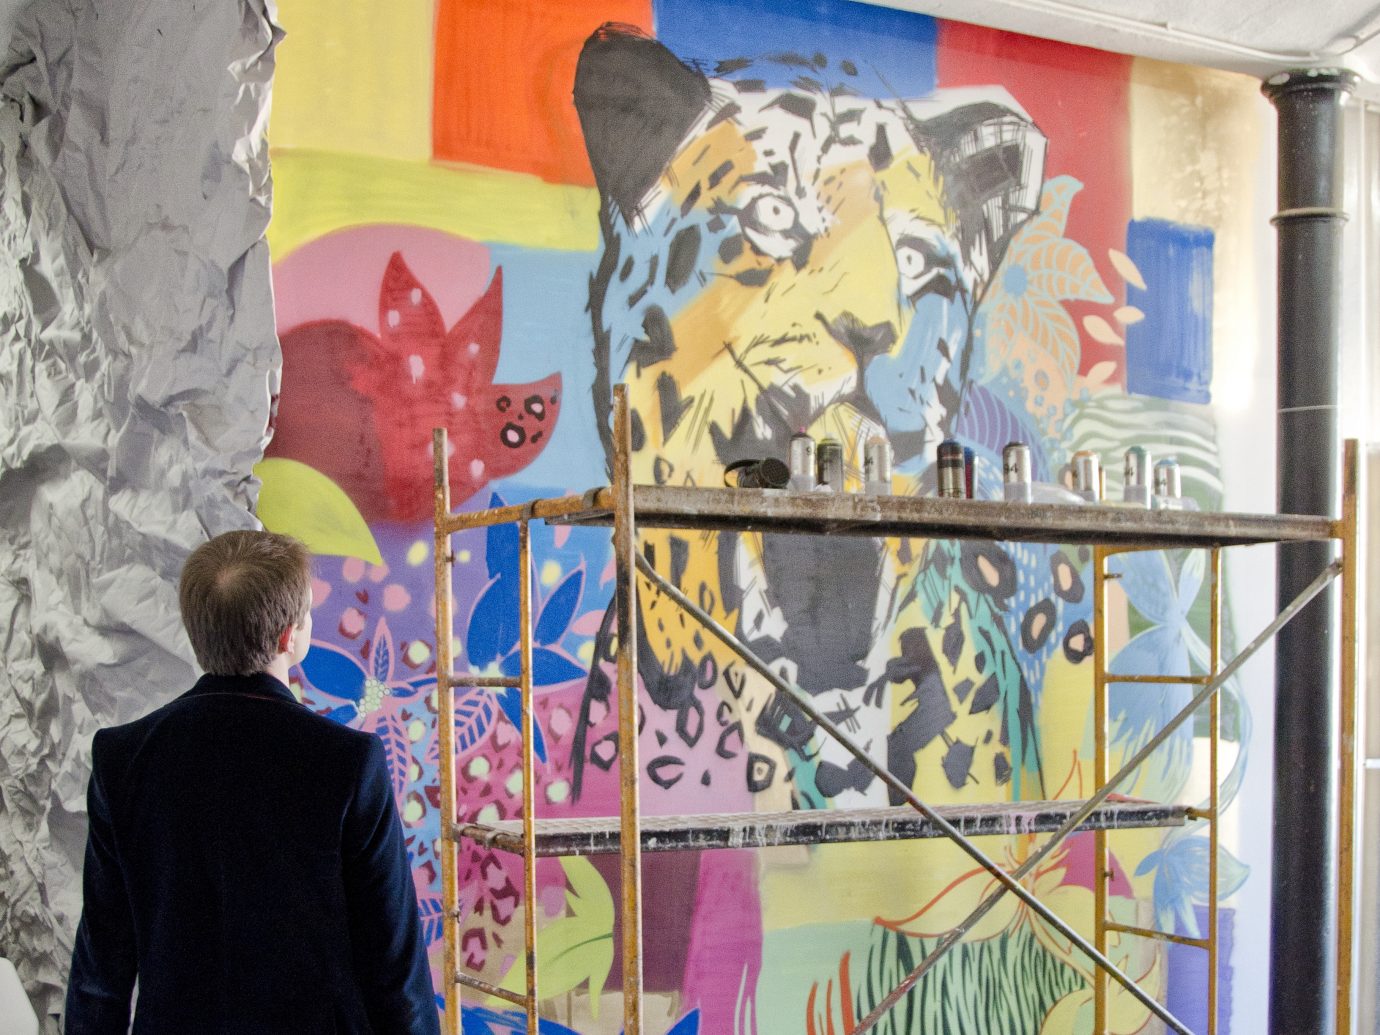 Man in a suit looking at a colorful wall art installation featuring a psychedelic leopard